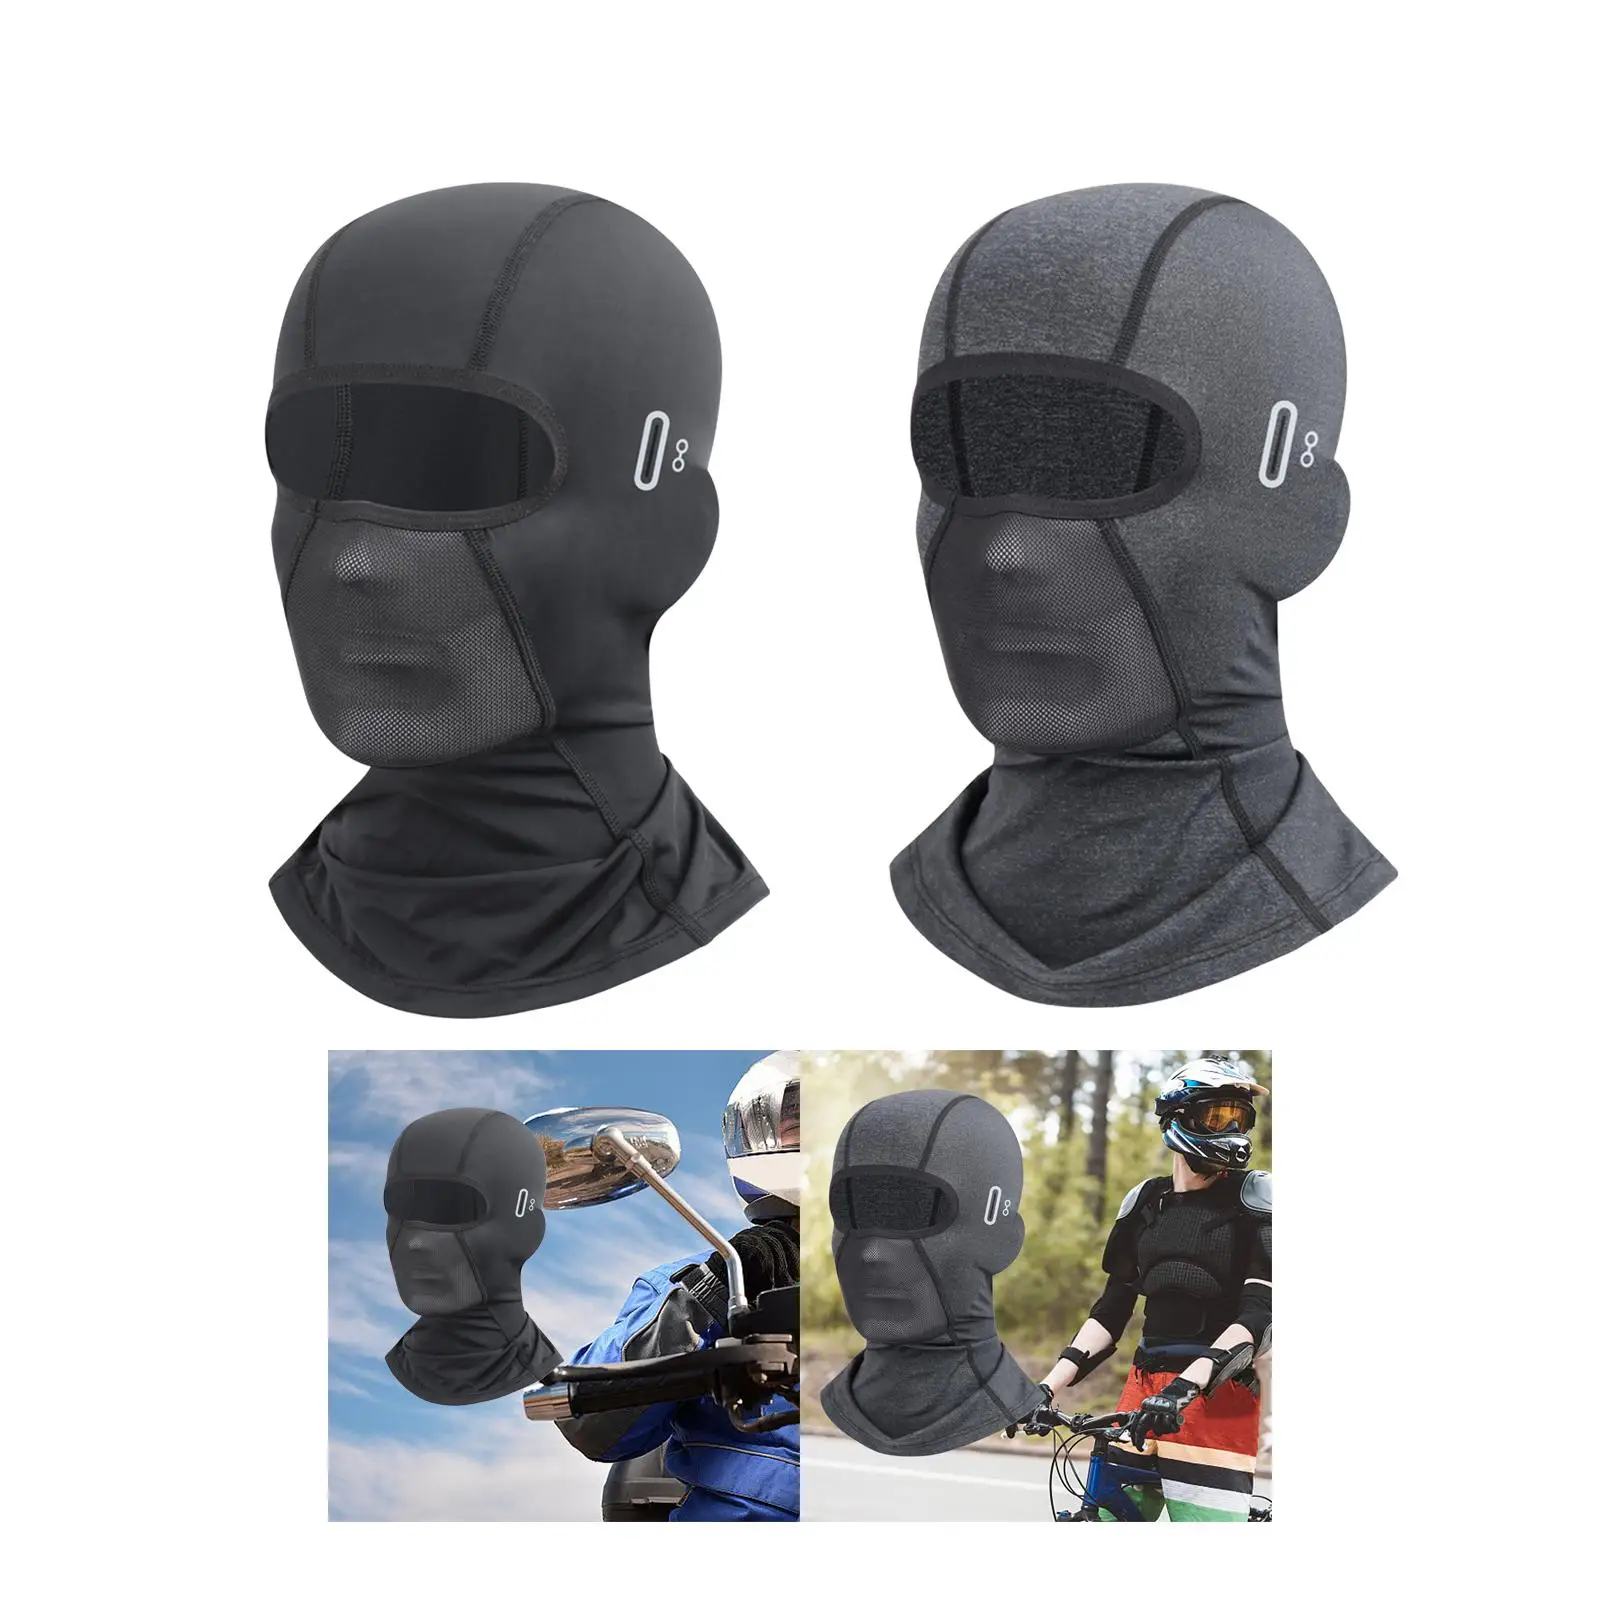 Balaclava Face Mask Cooling Summer Windproof Sun Protection Full Face Mask for Snowboarding Cycling Outdoor Riding Skiing Hiking